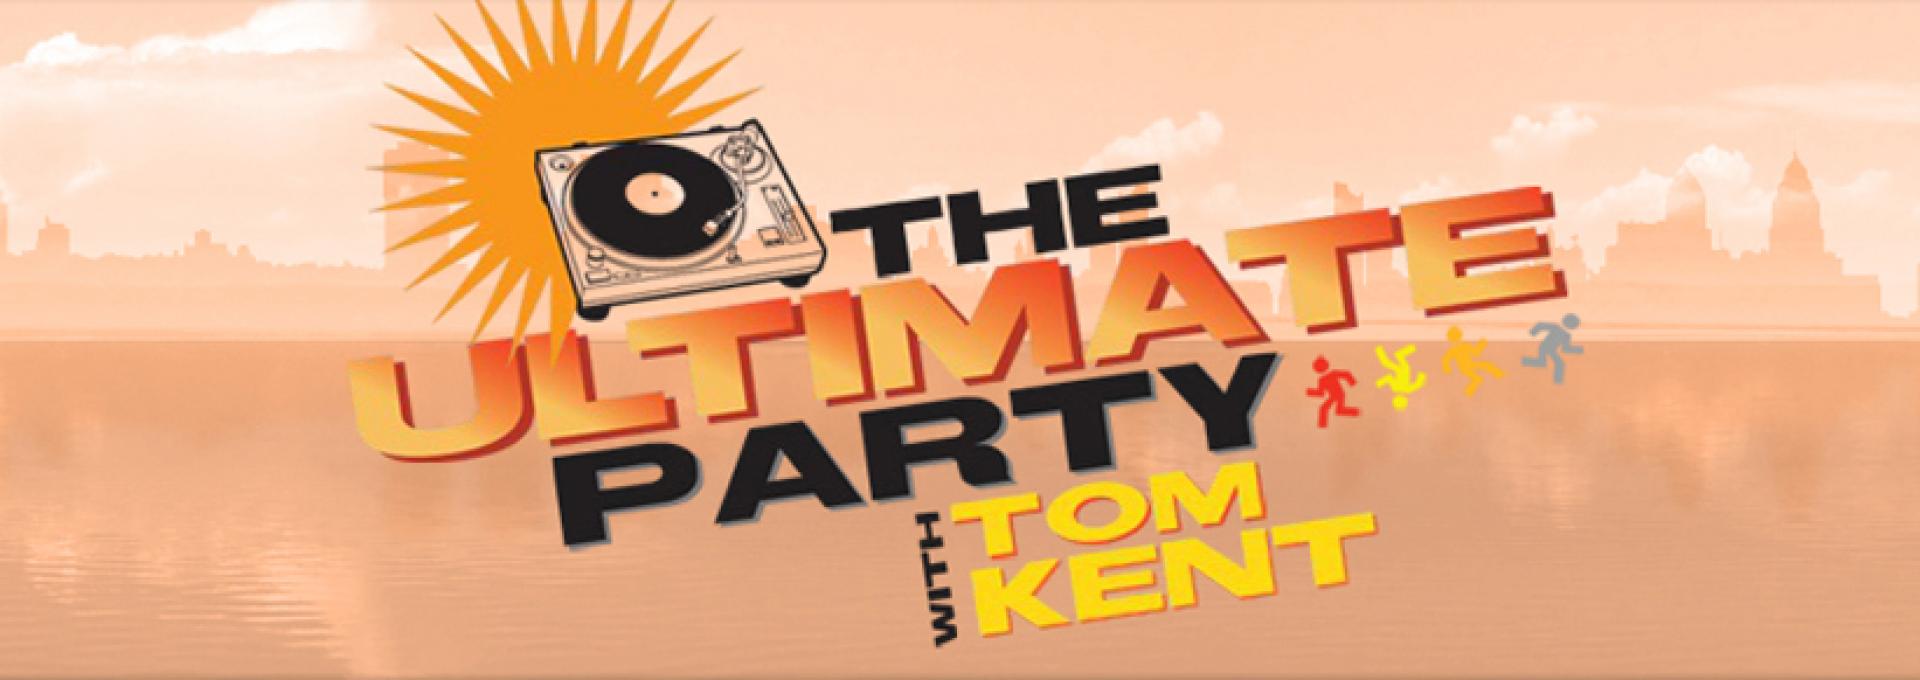 THE ULTIMATE PARTY with Tom Kent hero